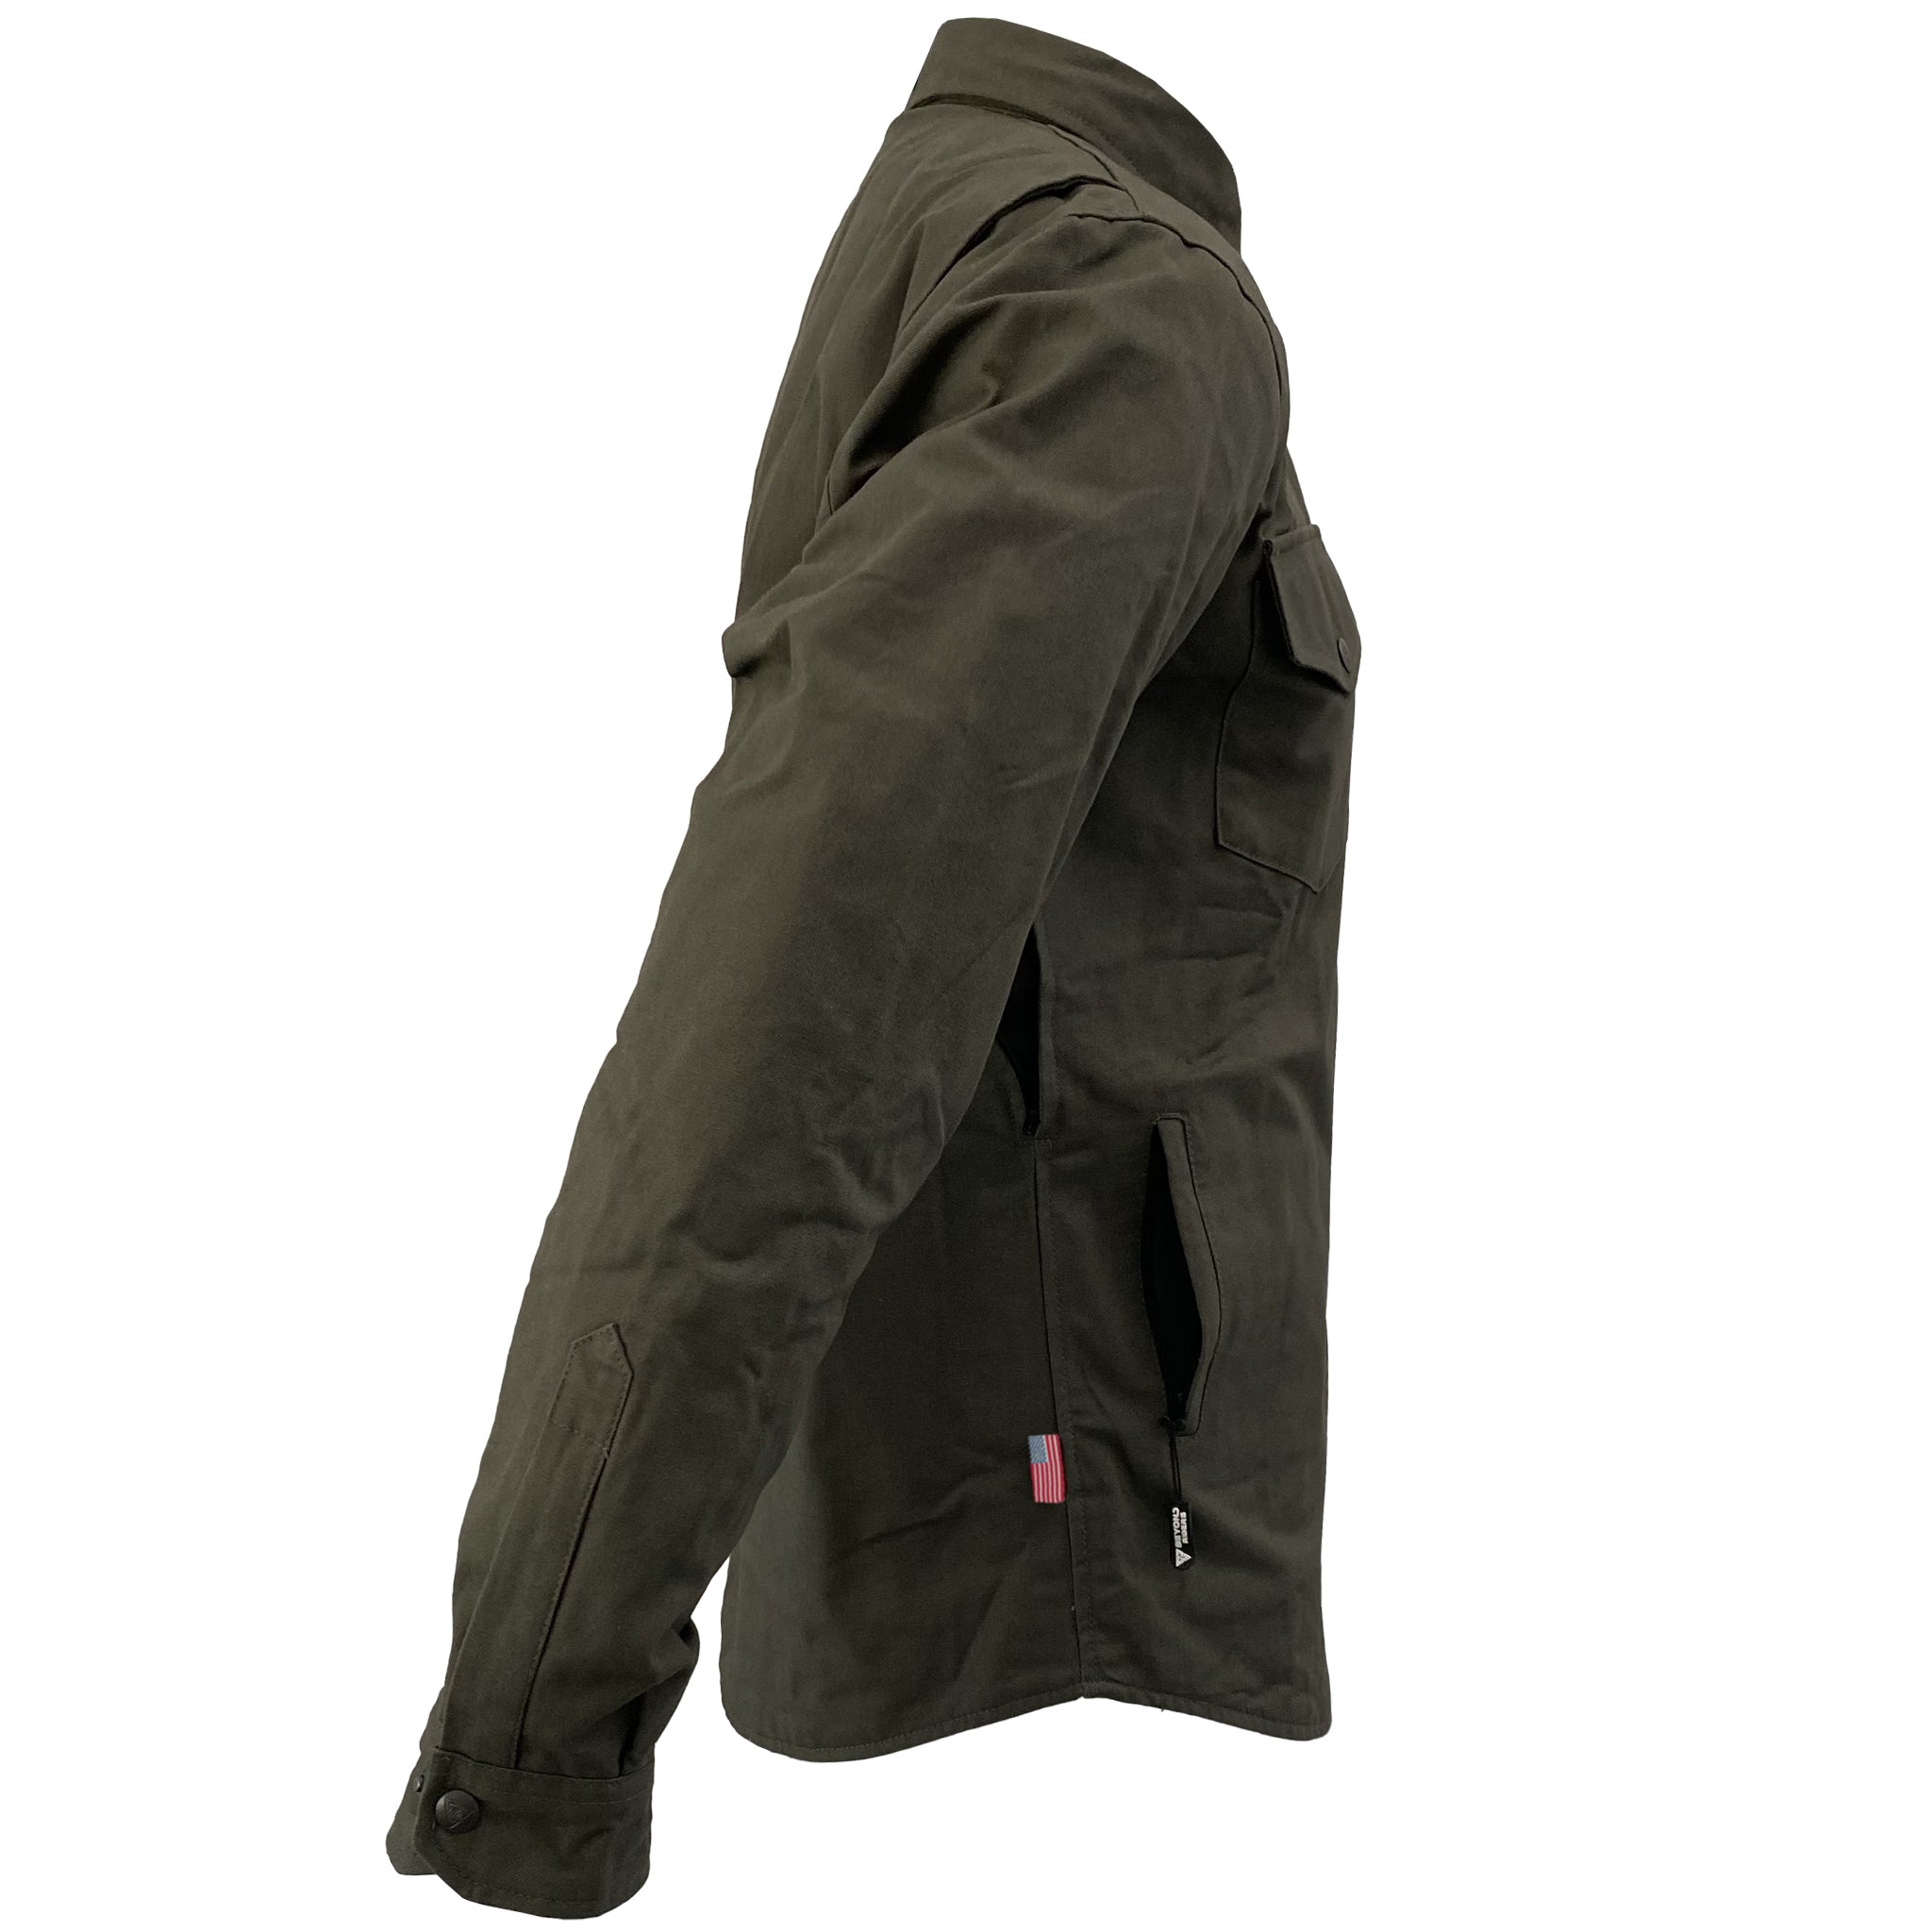 SALE Protective Canvas Jacket for Men - Army Green with Pads